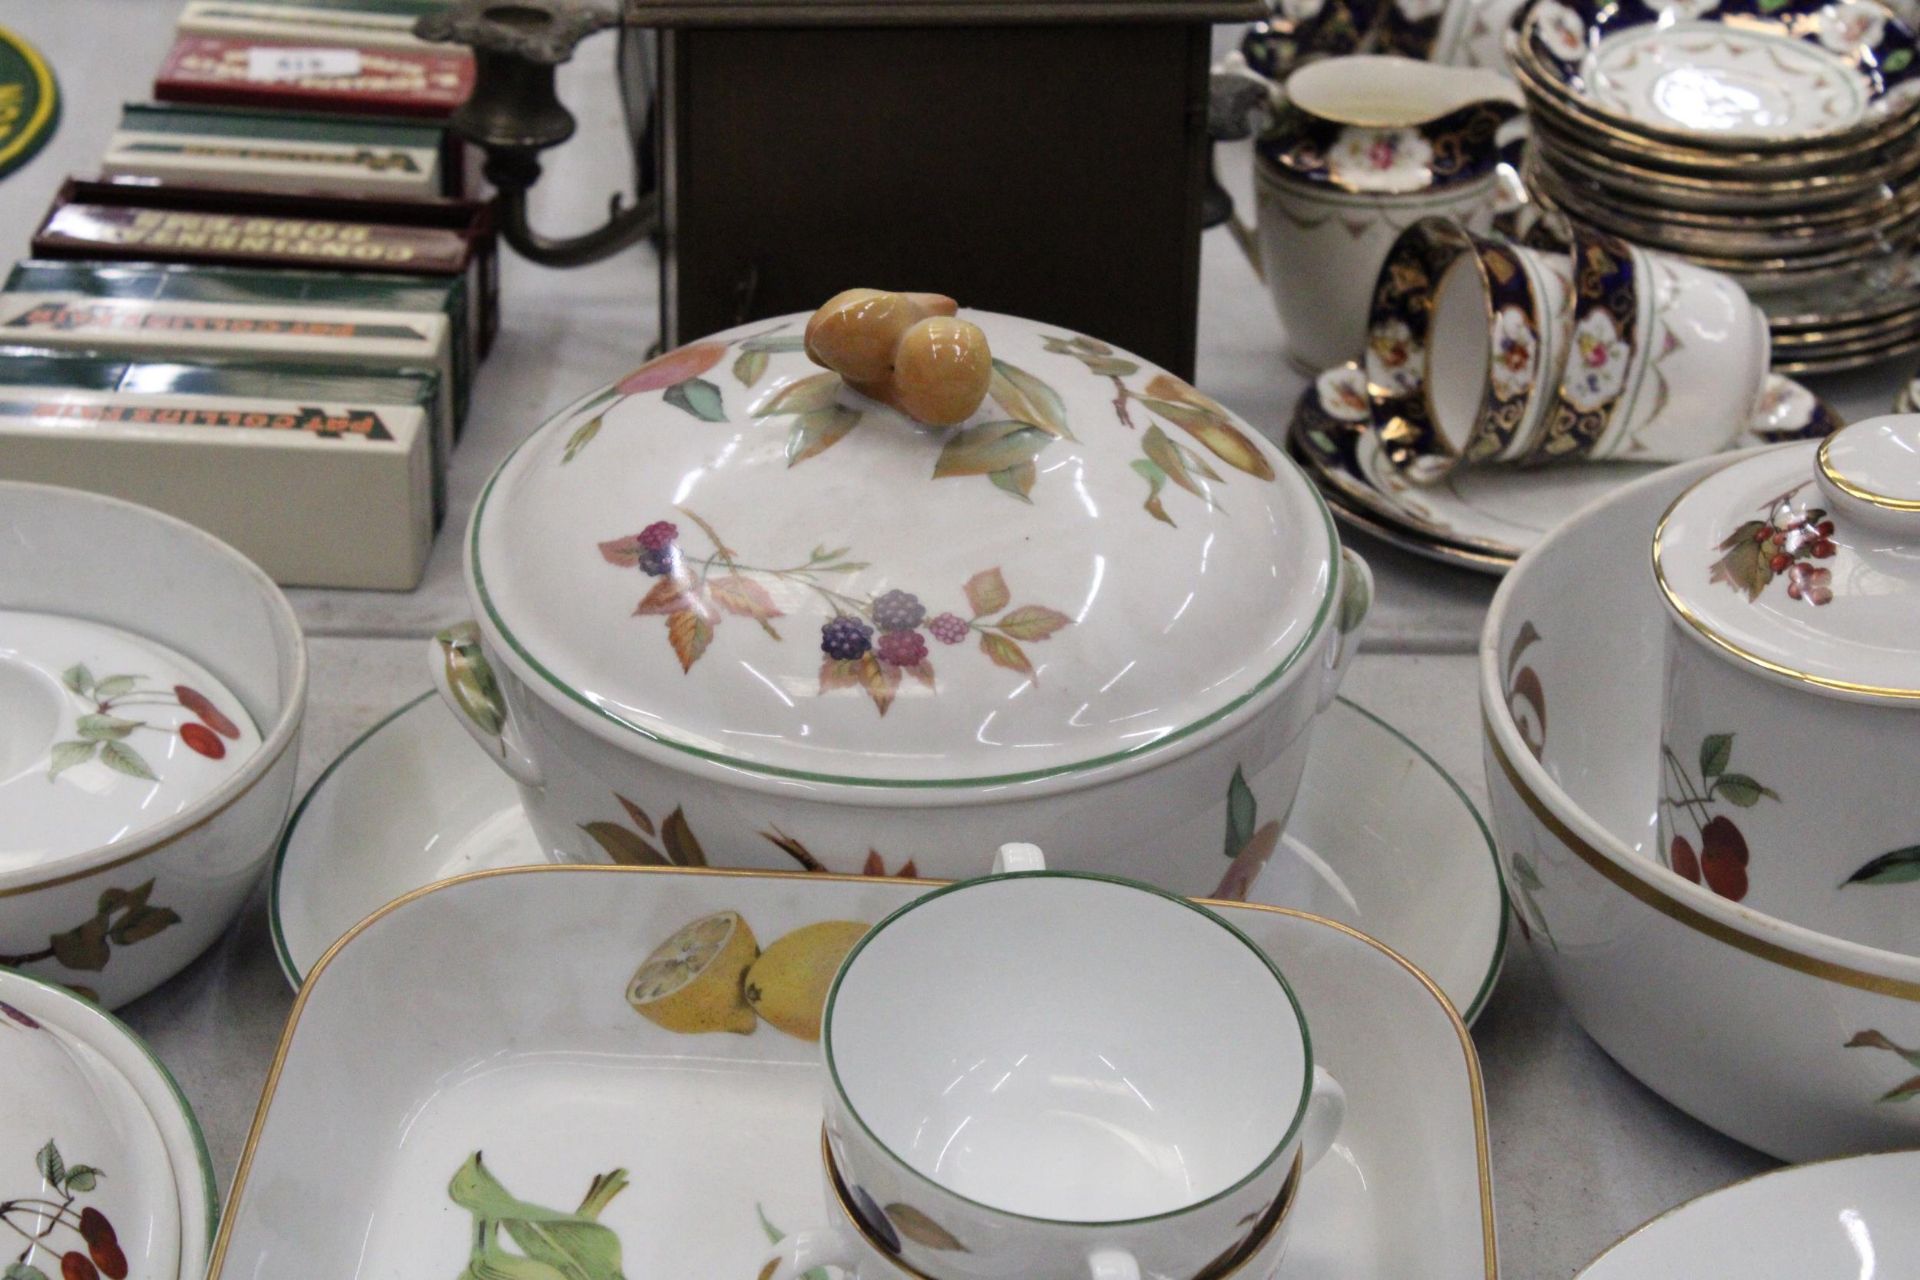 A QUANTITY OF ROYAL WORCESTER WARE TO INCLUDE PLATES, DISHES, PRESERVES JAR ETC - Image 7 of 7